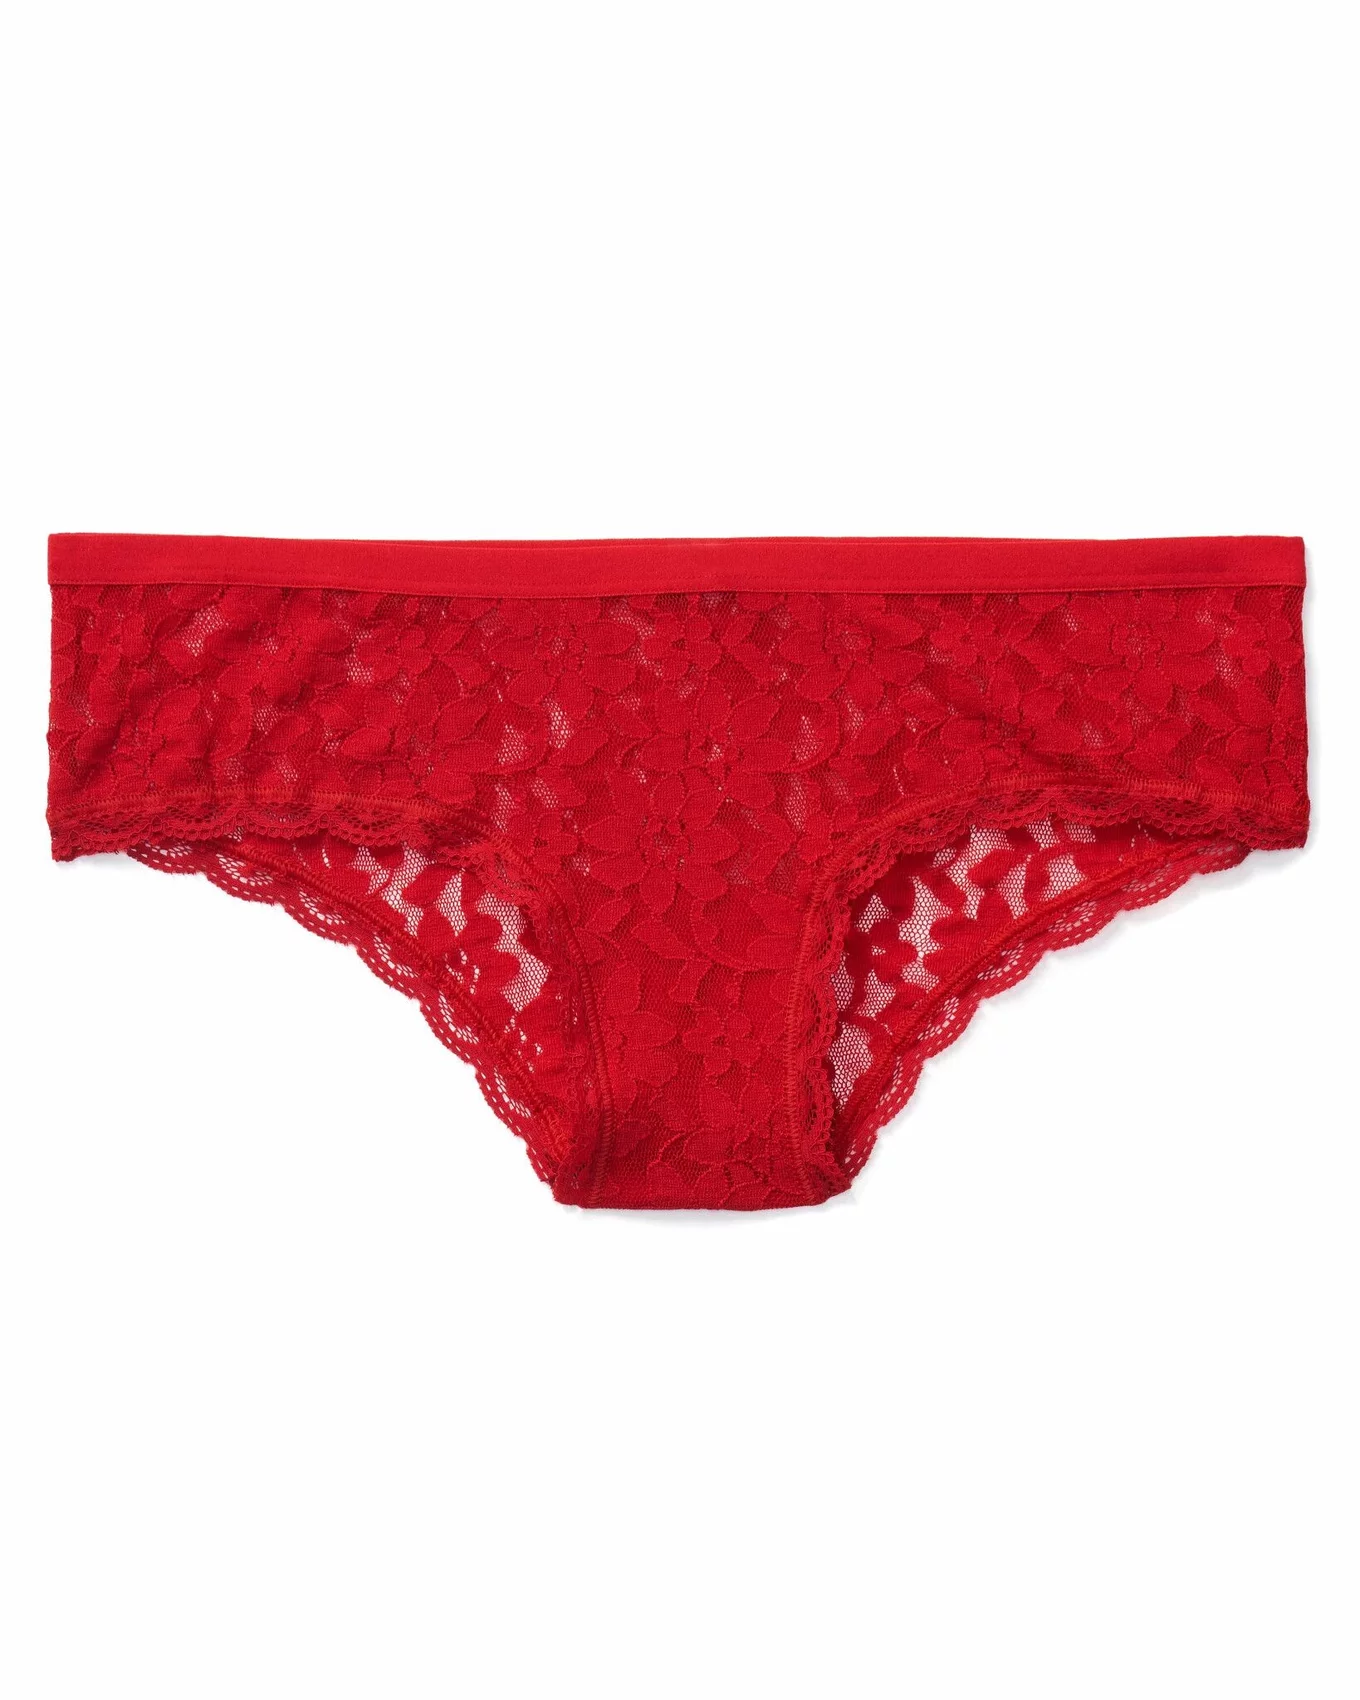 Adored by Adore Me Women’s Mandy Cross-Front Mesh and Lace Cheeky  Underwear, 2-Pack, Sizes up to XXXL